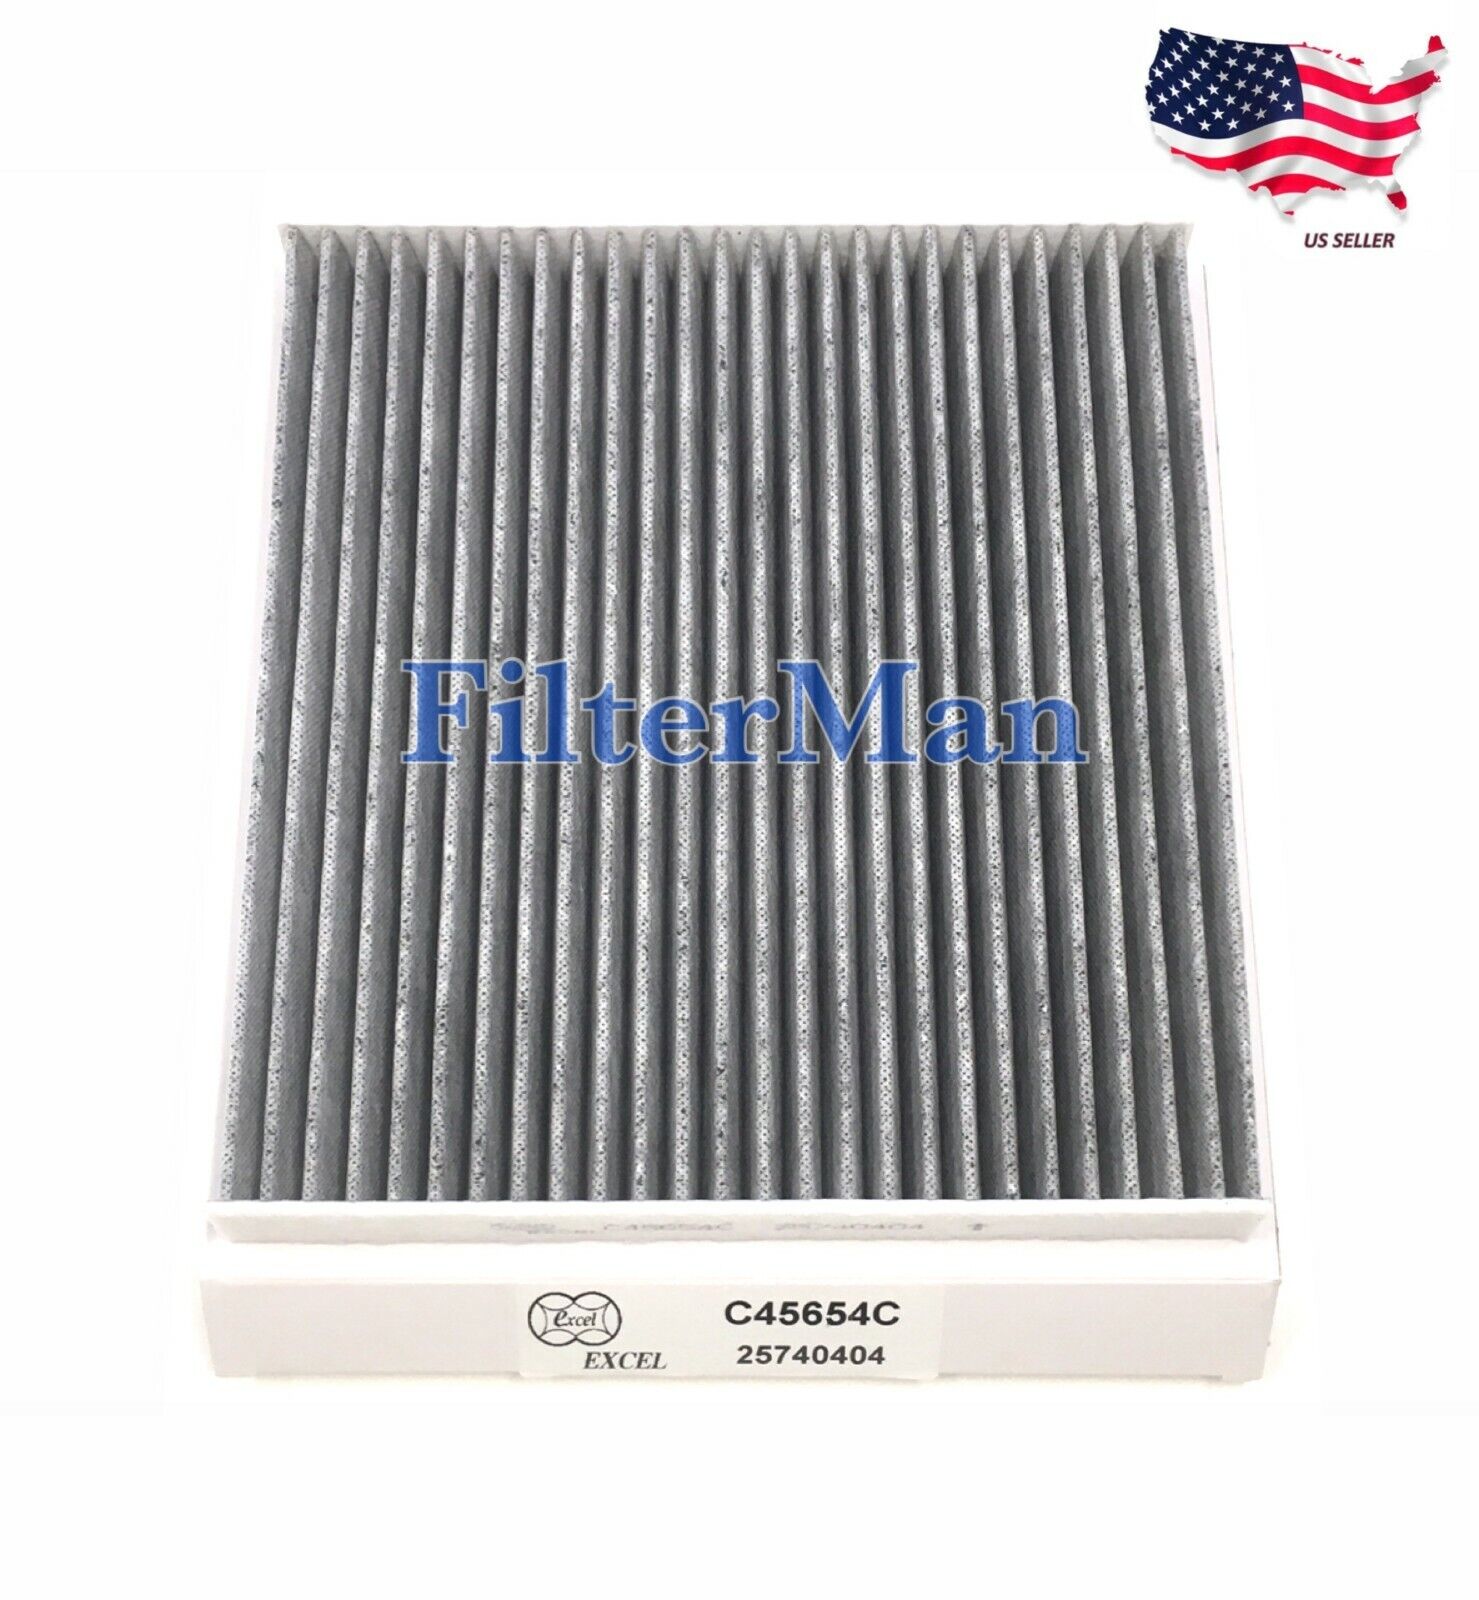 CARBONIZED CABIN AIR FILTER FOR CADILLAC CTS STS SRX CTS-V US SELLER